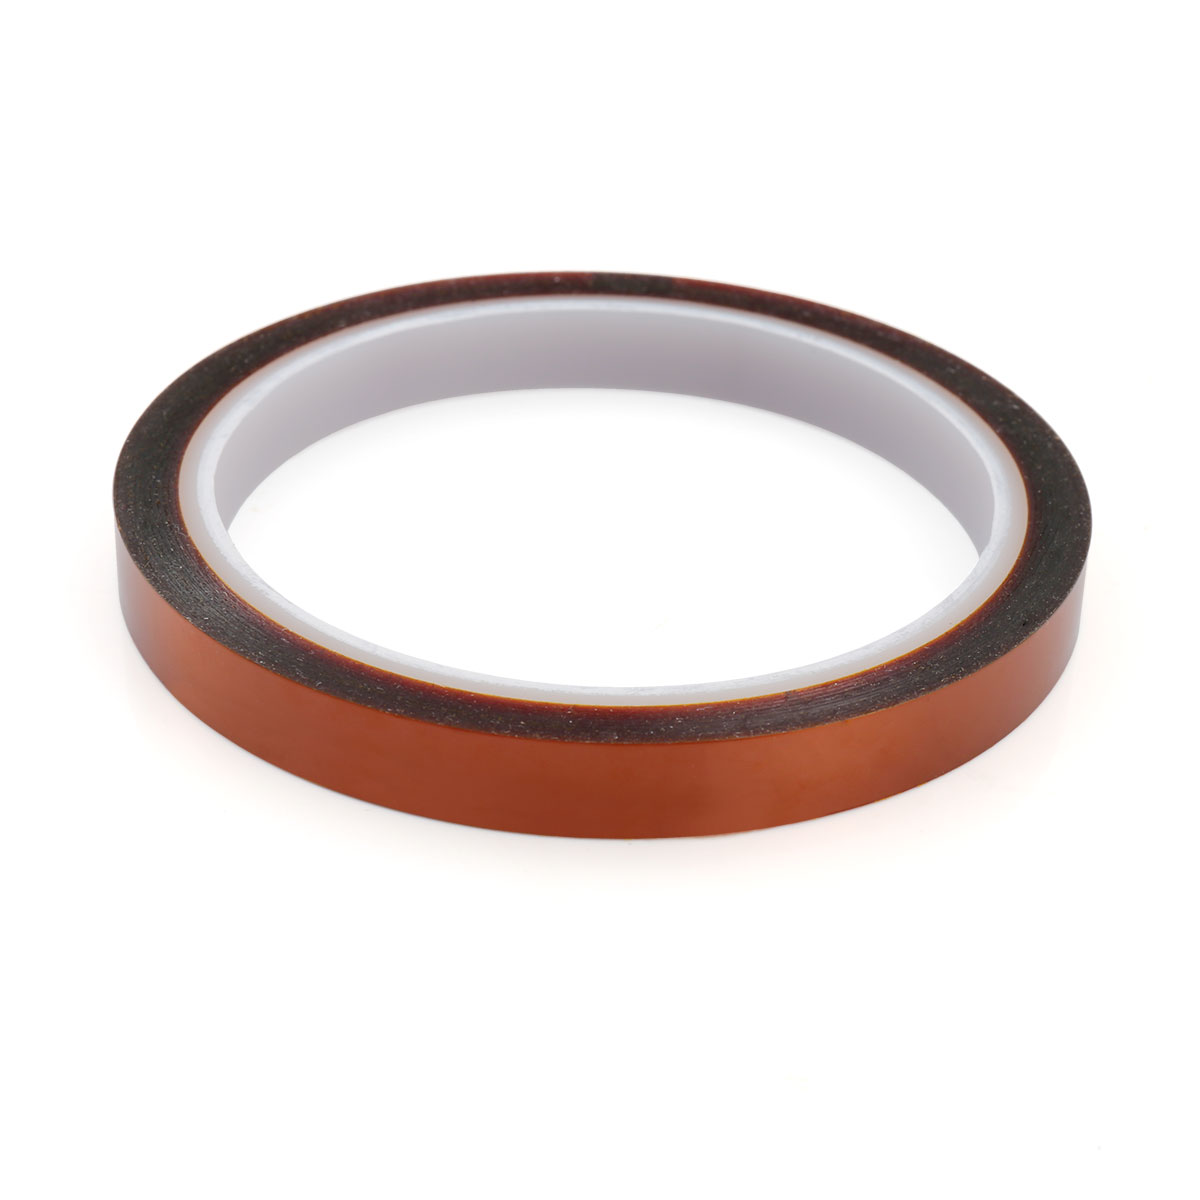 10mm * 33m High Temperature Heat Resistant Adhelsive Kapton Tape for Electrical Insulation